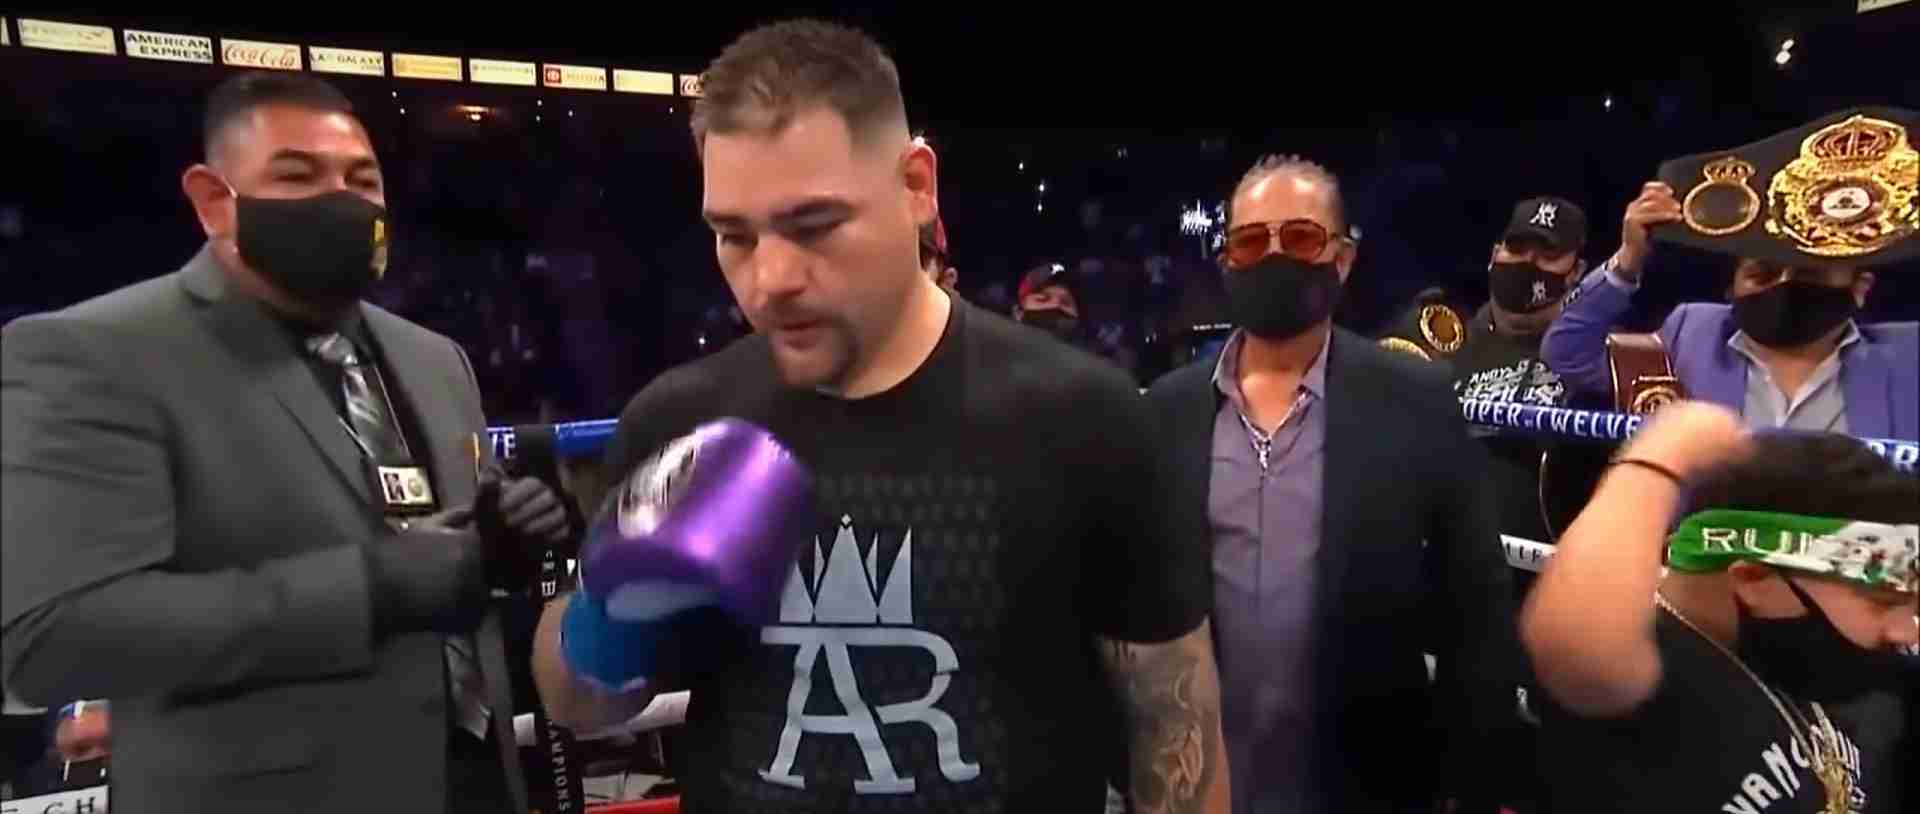 Andy Ruiz first fight of 2022 looks like a big one